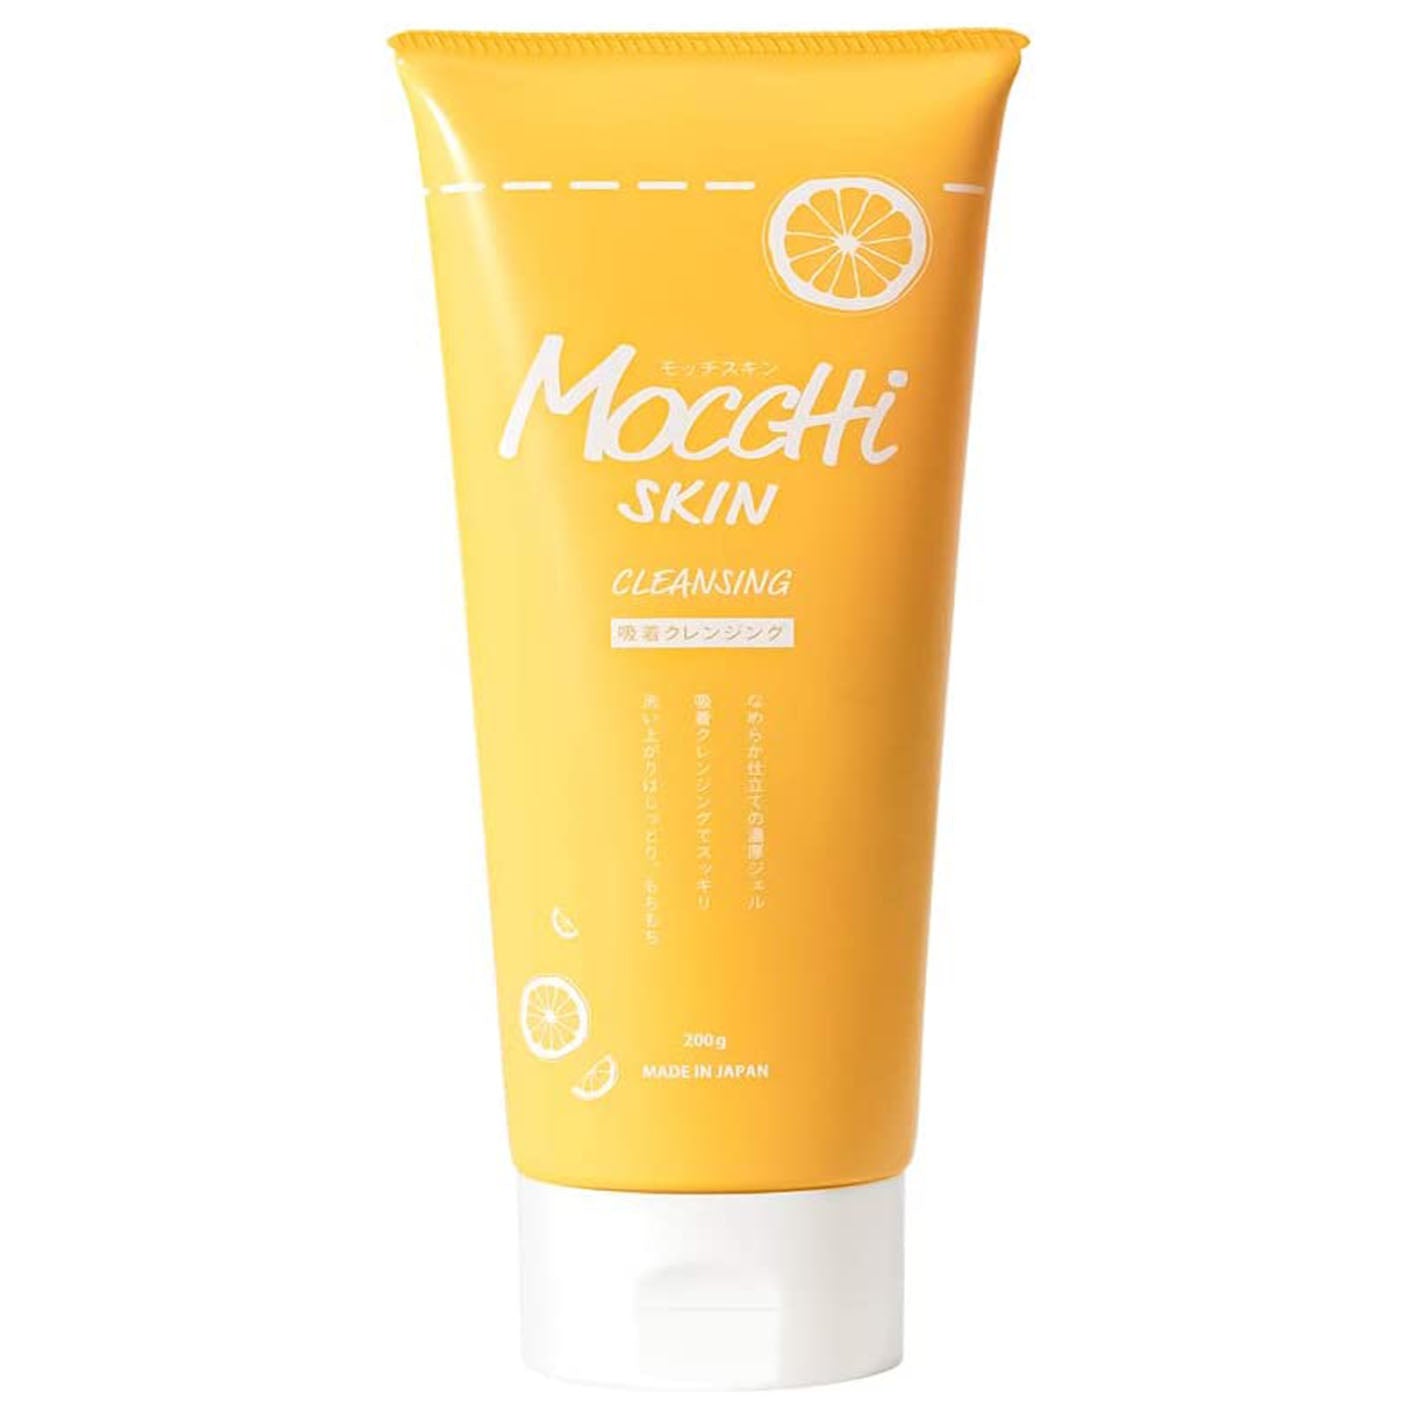 MoccHi SKIN Adsorption Cleansing 200g - Lemon - Harajuku Culture Japan - Japanease Products Store Beauty and Stationery